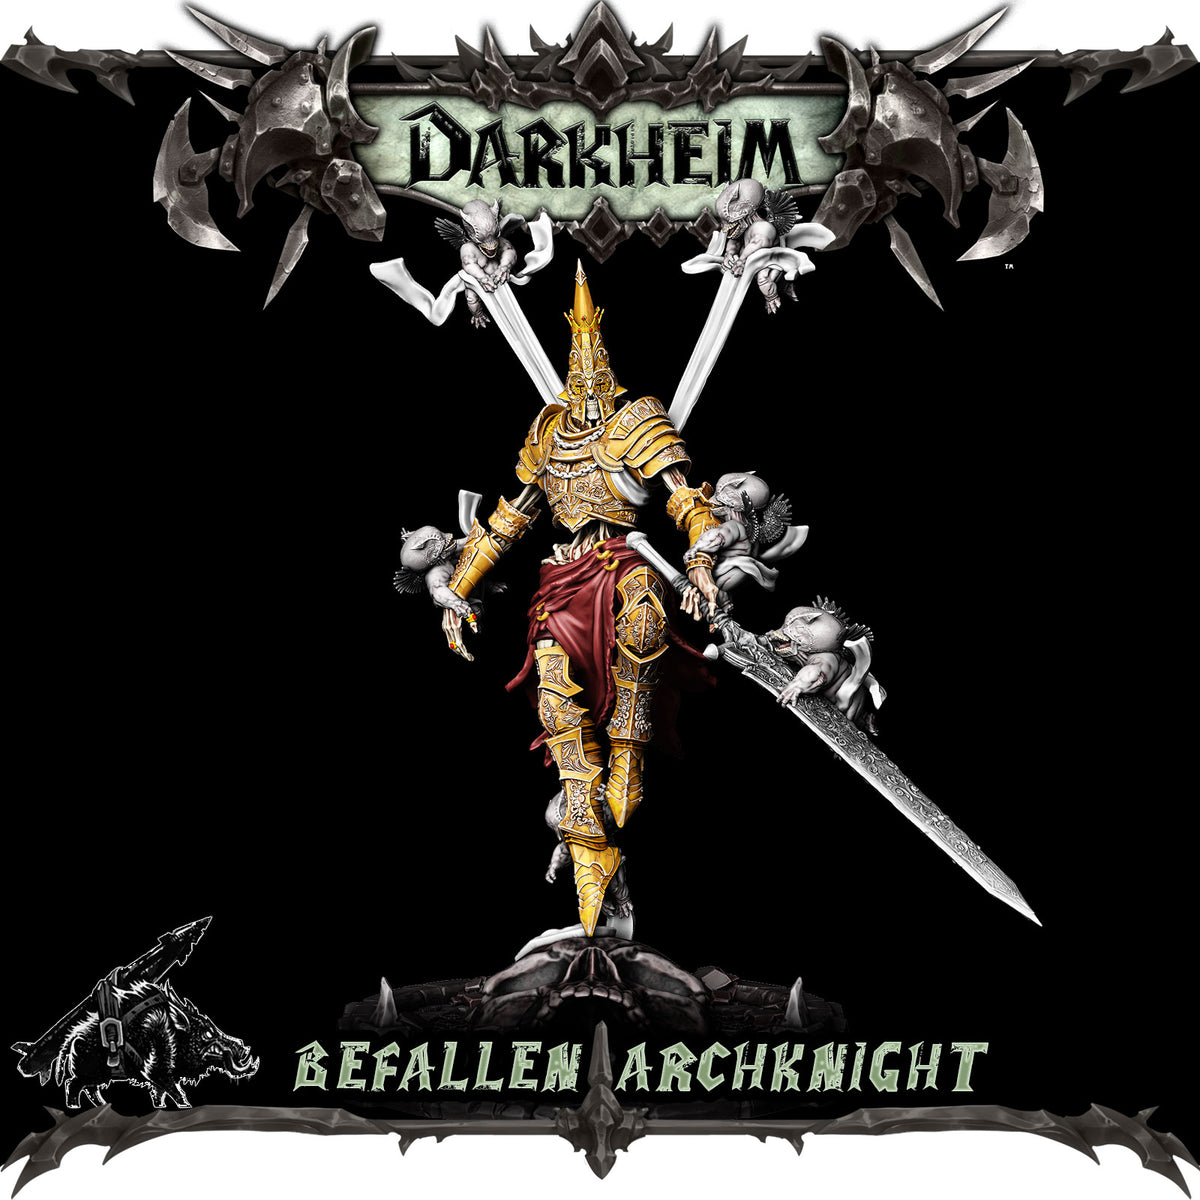 BEFALLEN ARCH KNIGHT - RPG Darkheim Collection | Dungeons and Dragons Models | Epic Miniatures l 3D Printed Resin Figurines l Grimdark Mini